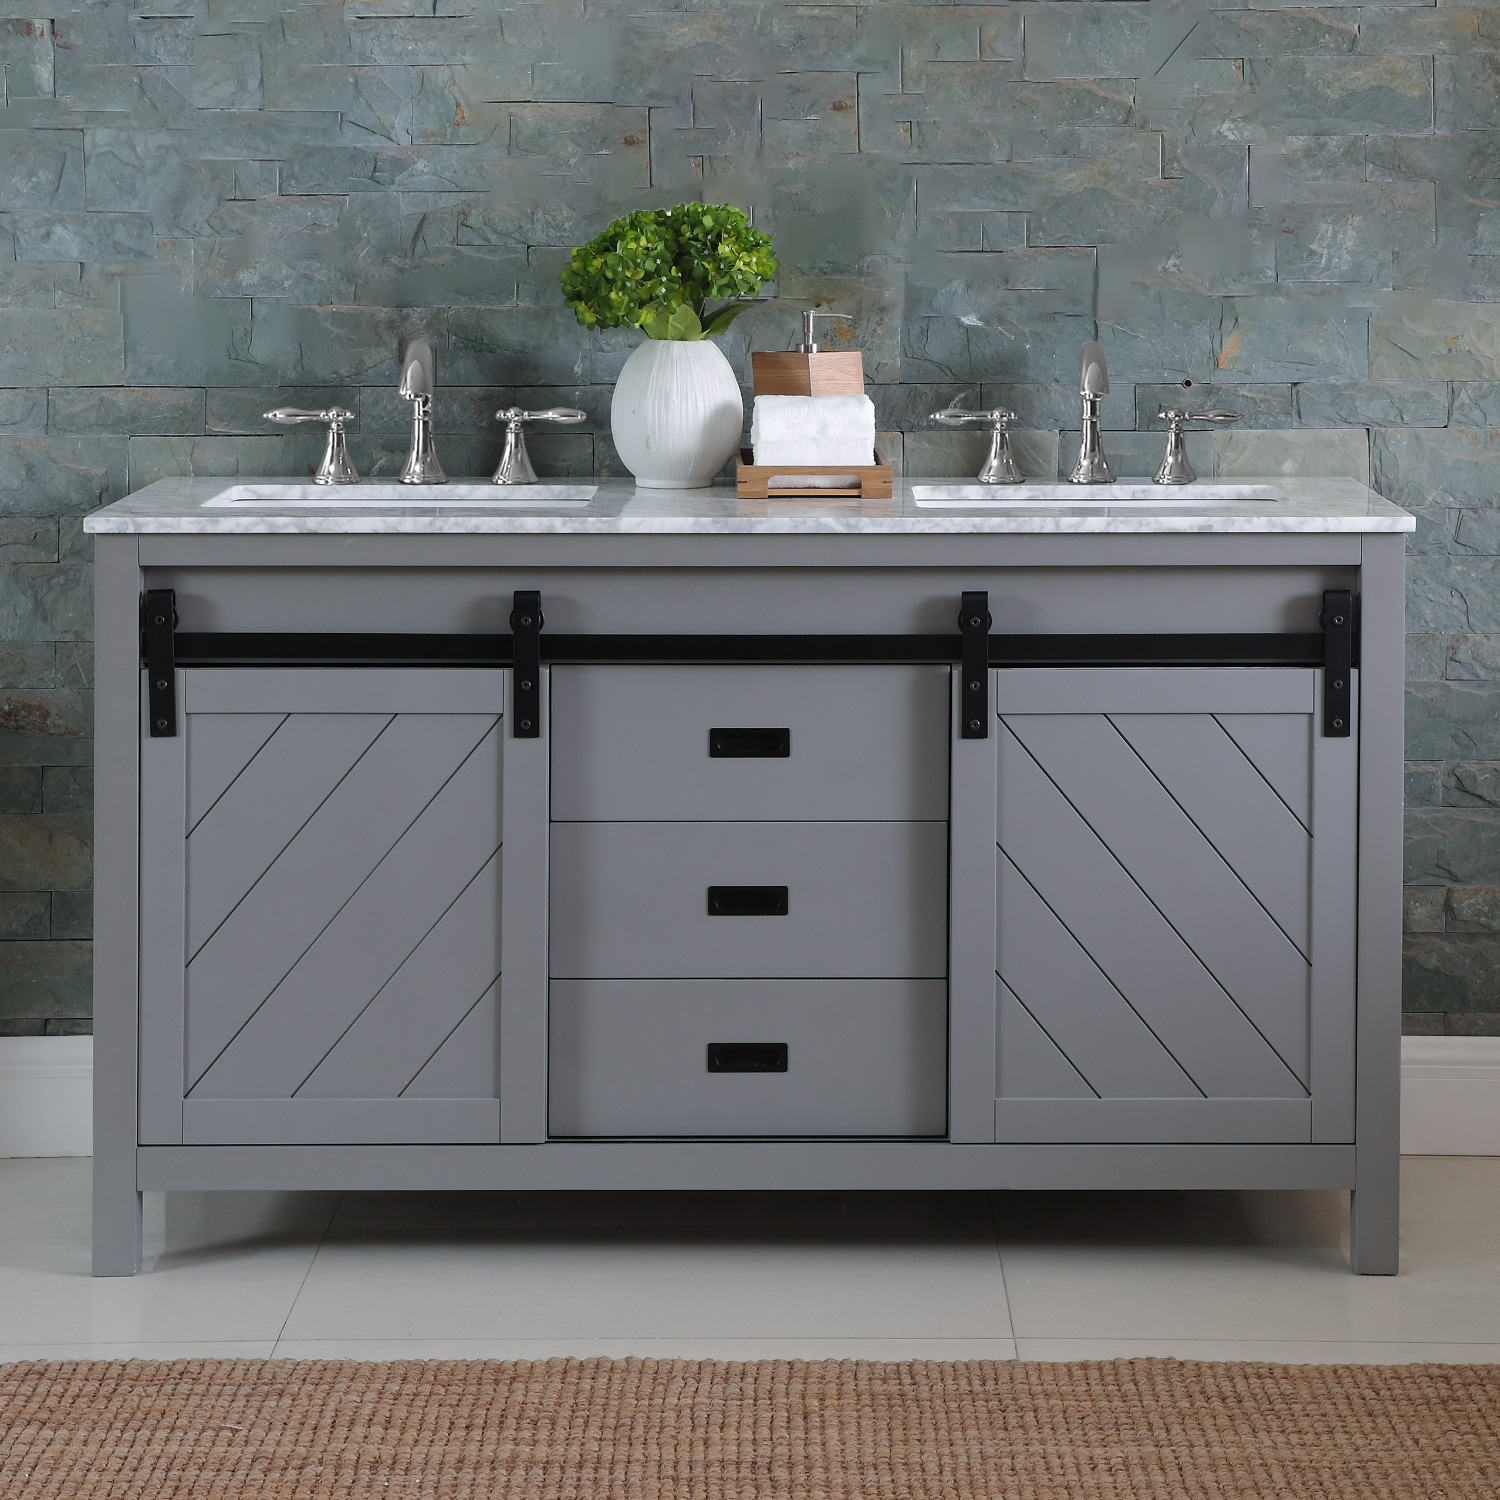 https://ak1.ostkcdn.com/images/products/is/images/direct/732325de772d916255f7ed1b28958ebcfc0f4b98/Kinsley-Solid-Wood-Double-Bathroom-Vanity-with-Sliding-Doors.jpg